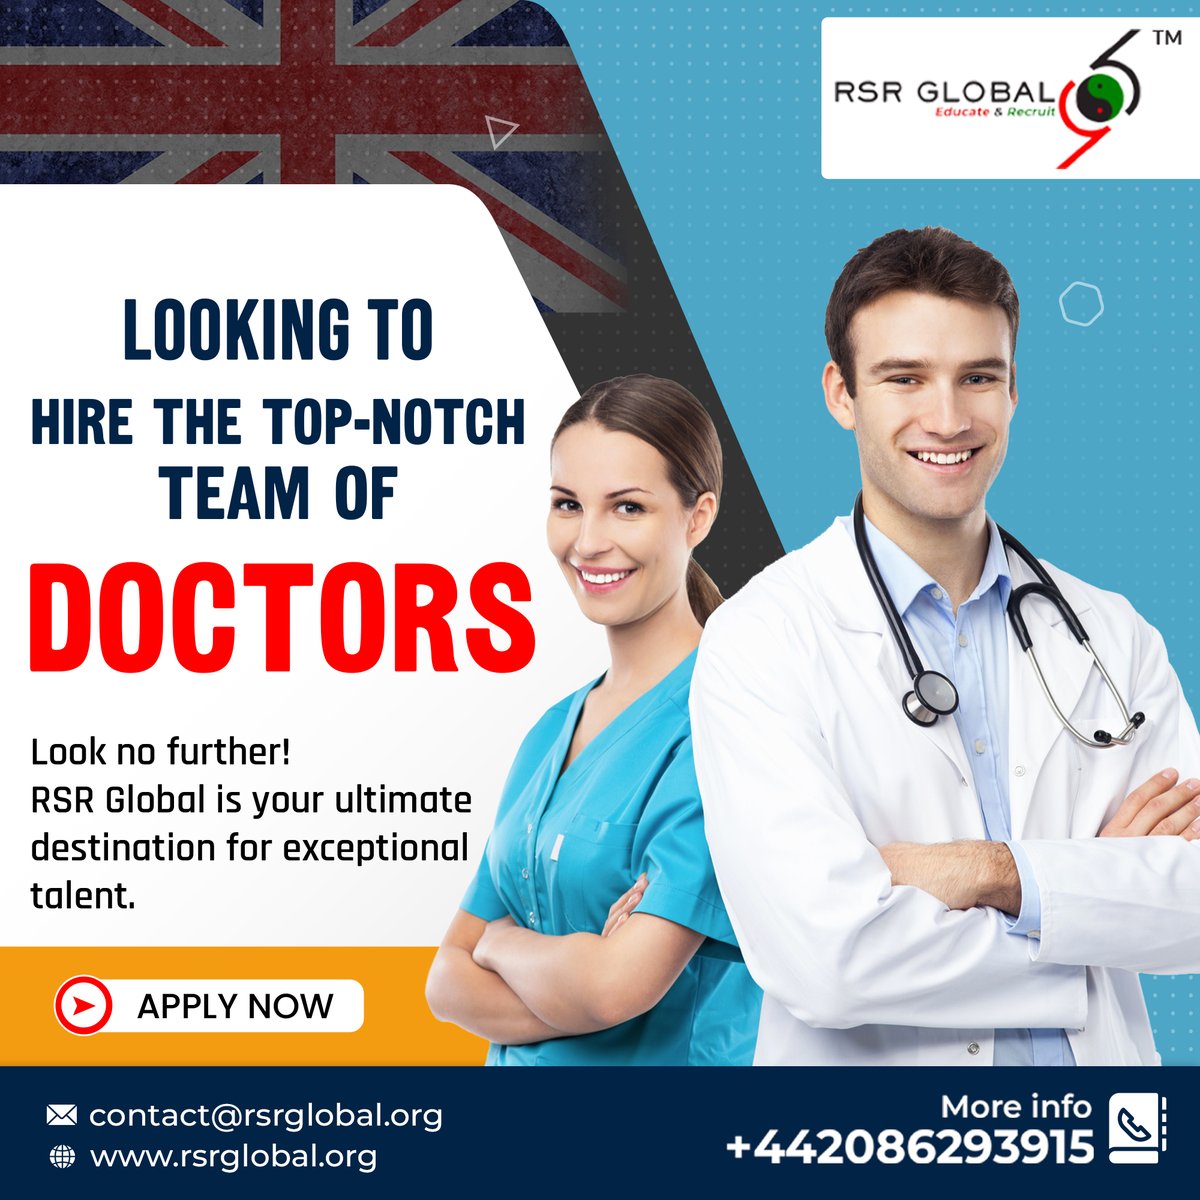 RSR Global - International Recruitment Consultancy
Visit -   rsrglobal.org
Contact us - +44 20 8629 3915
Email us at - contact@rsrglobal.org

#RSRGlobal #hire #TopNotchService #team #doctors #Ultimate #destination #ExceptionalTalent #HealthcareSolutions